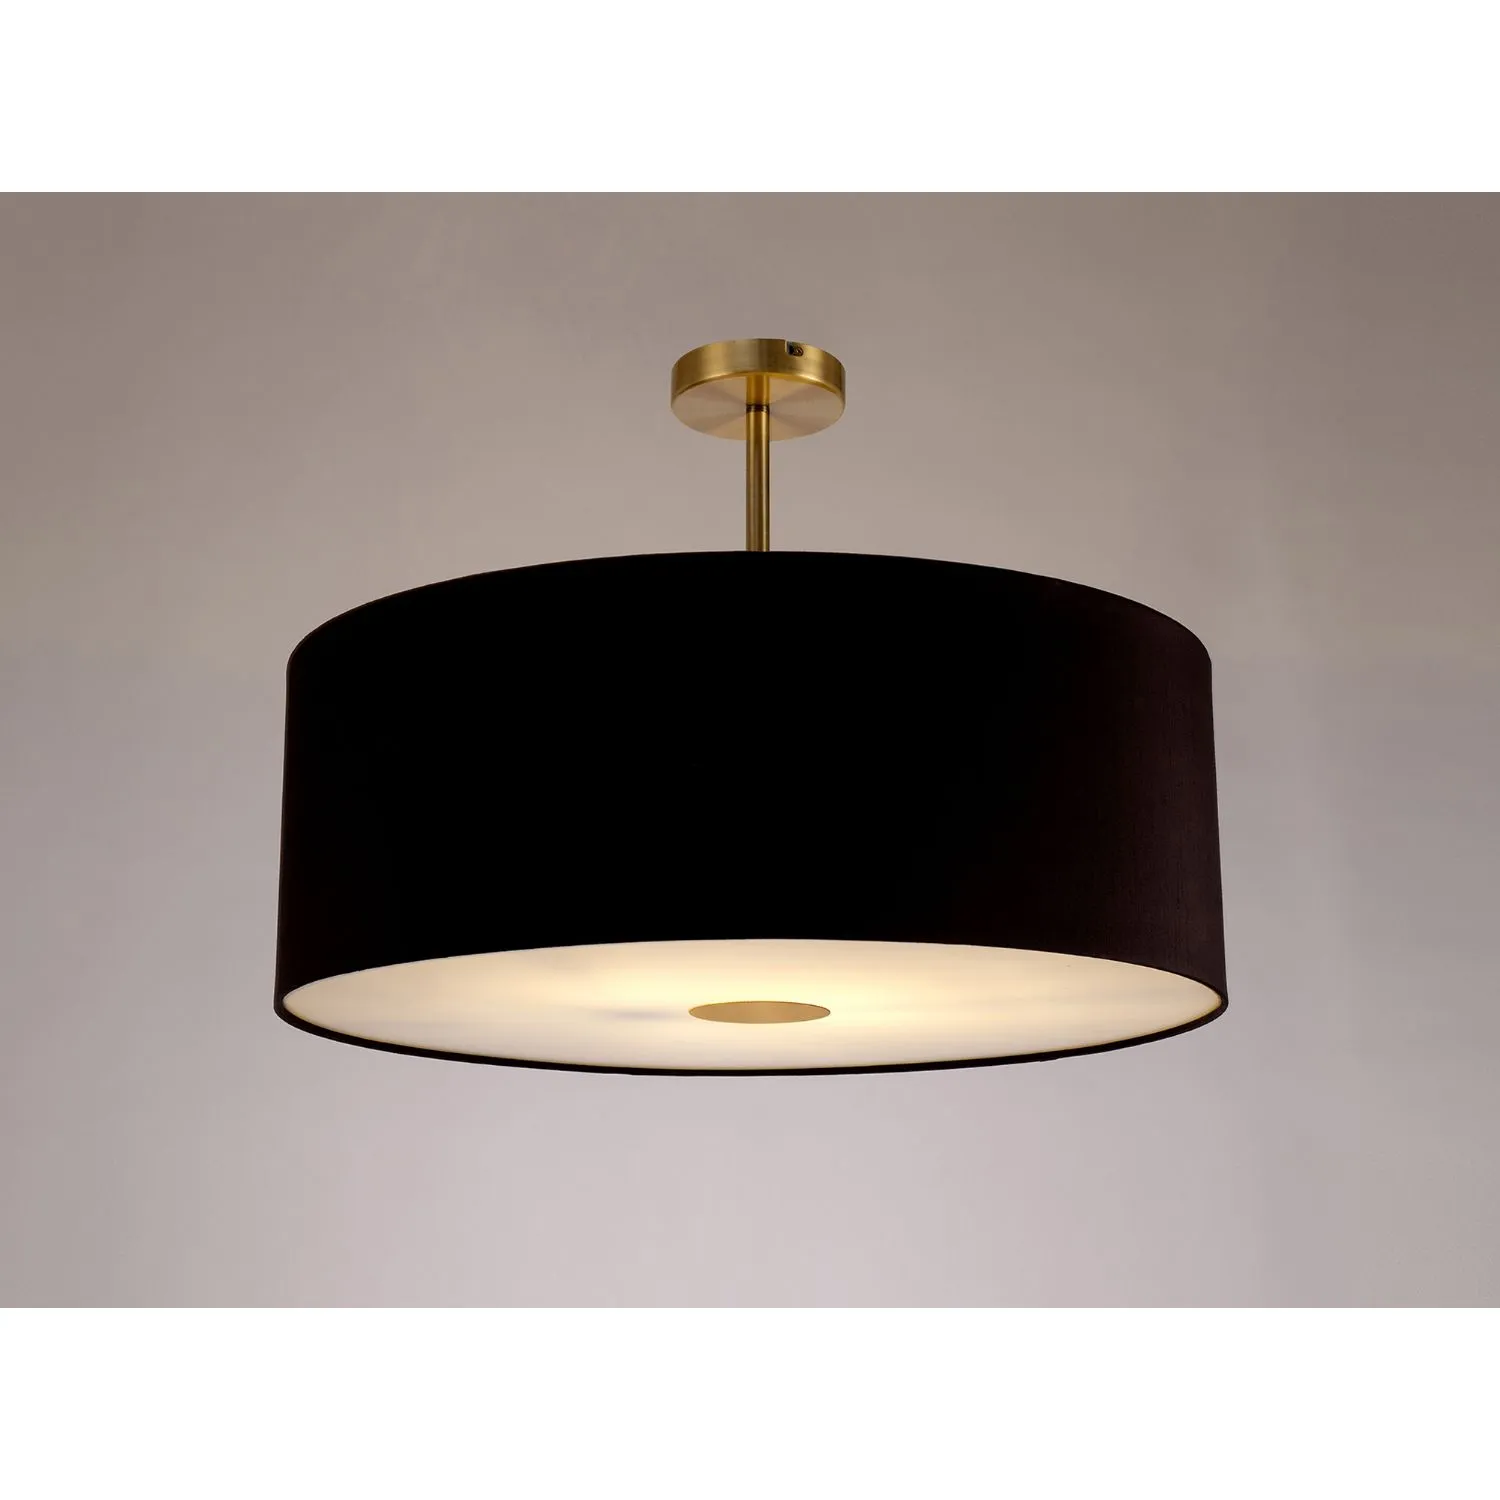 Baymont Antique Brass 1 Light E27 Semi Flush c w 600mm Dual Faux Silk Shade, Black Green Olive c w 600mm Frosted AB Acrylic Diffuser